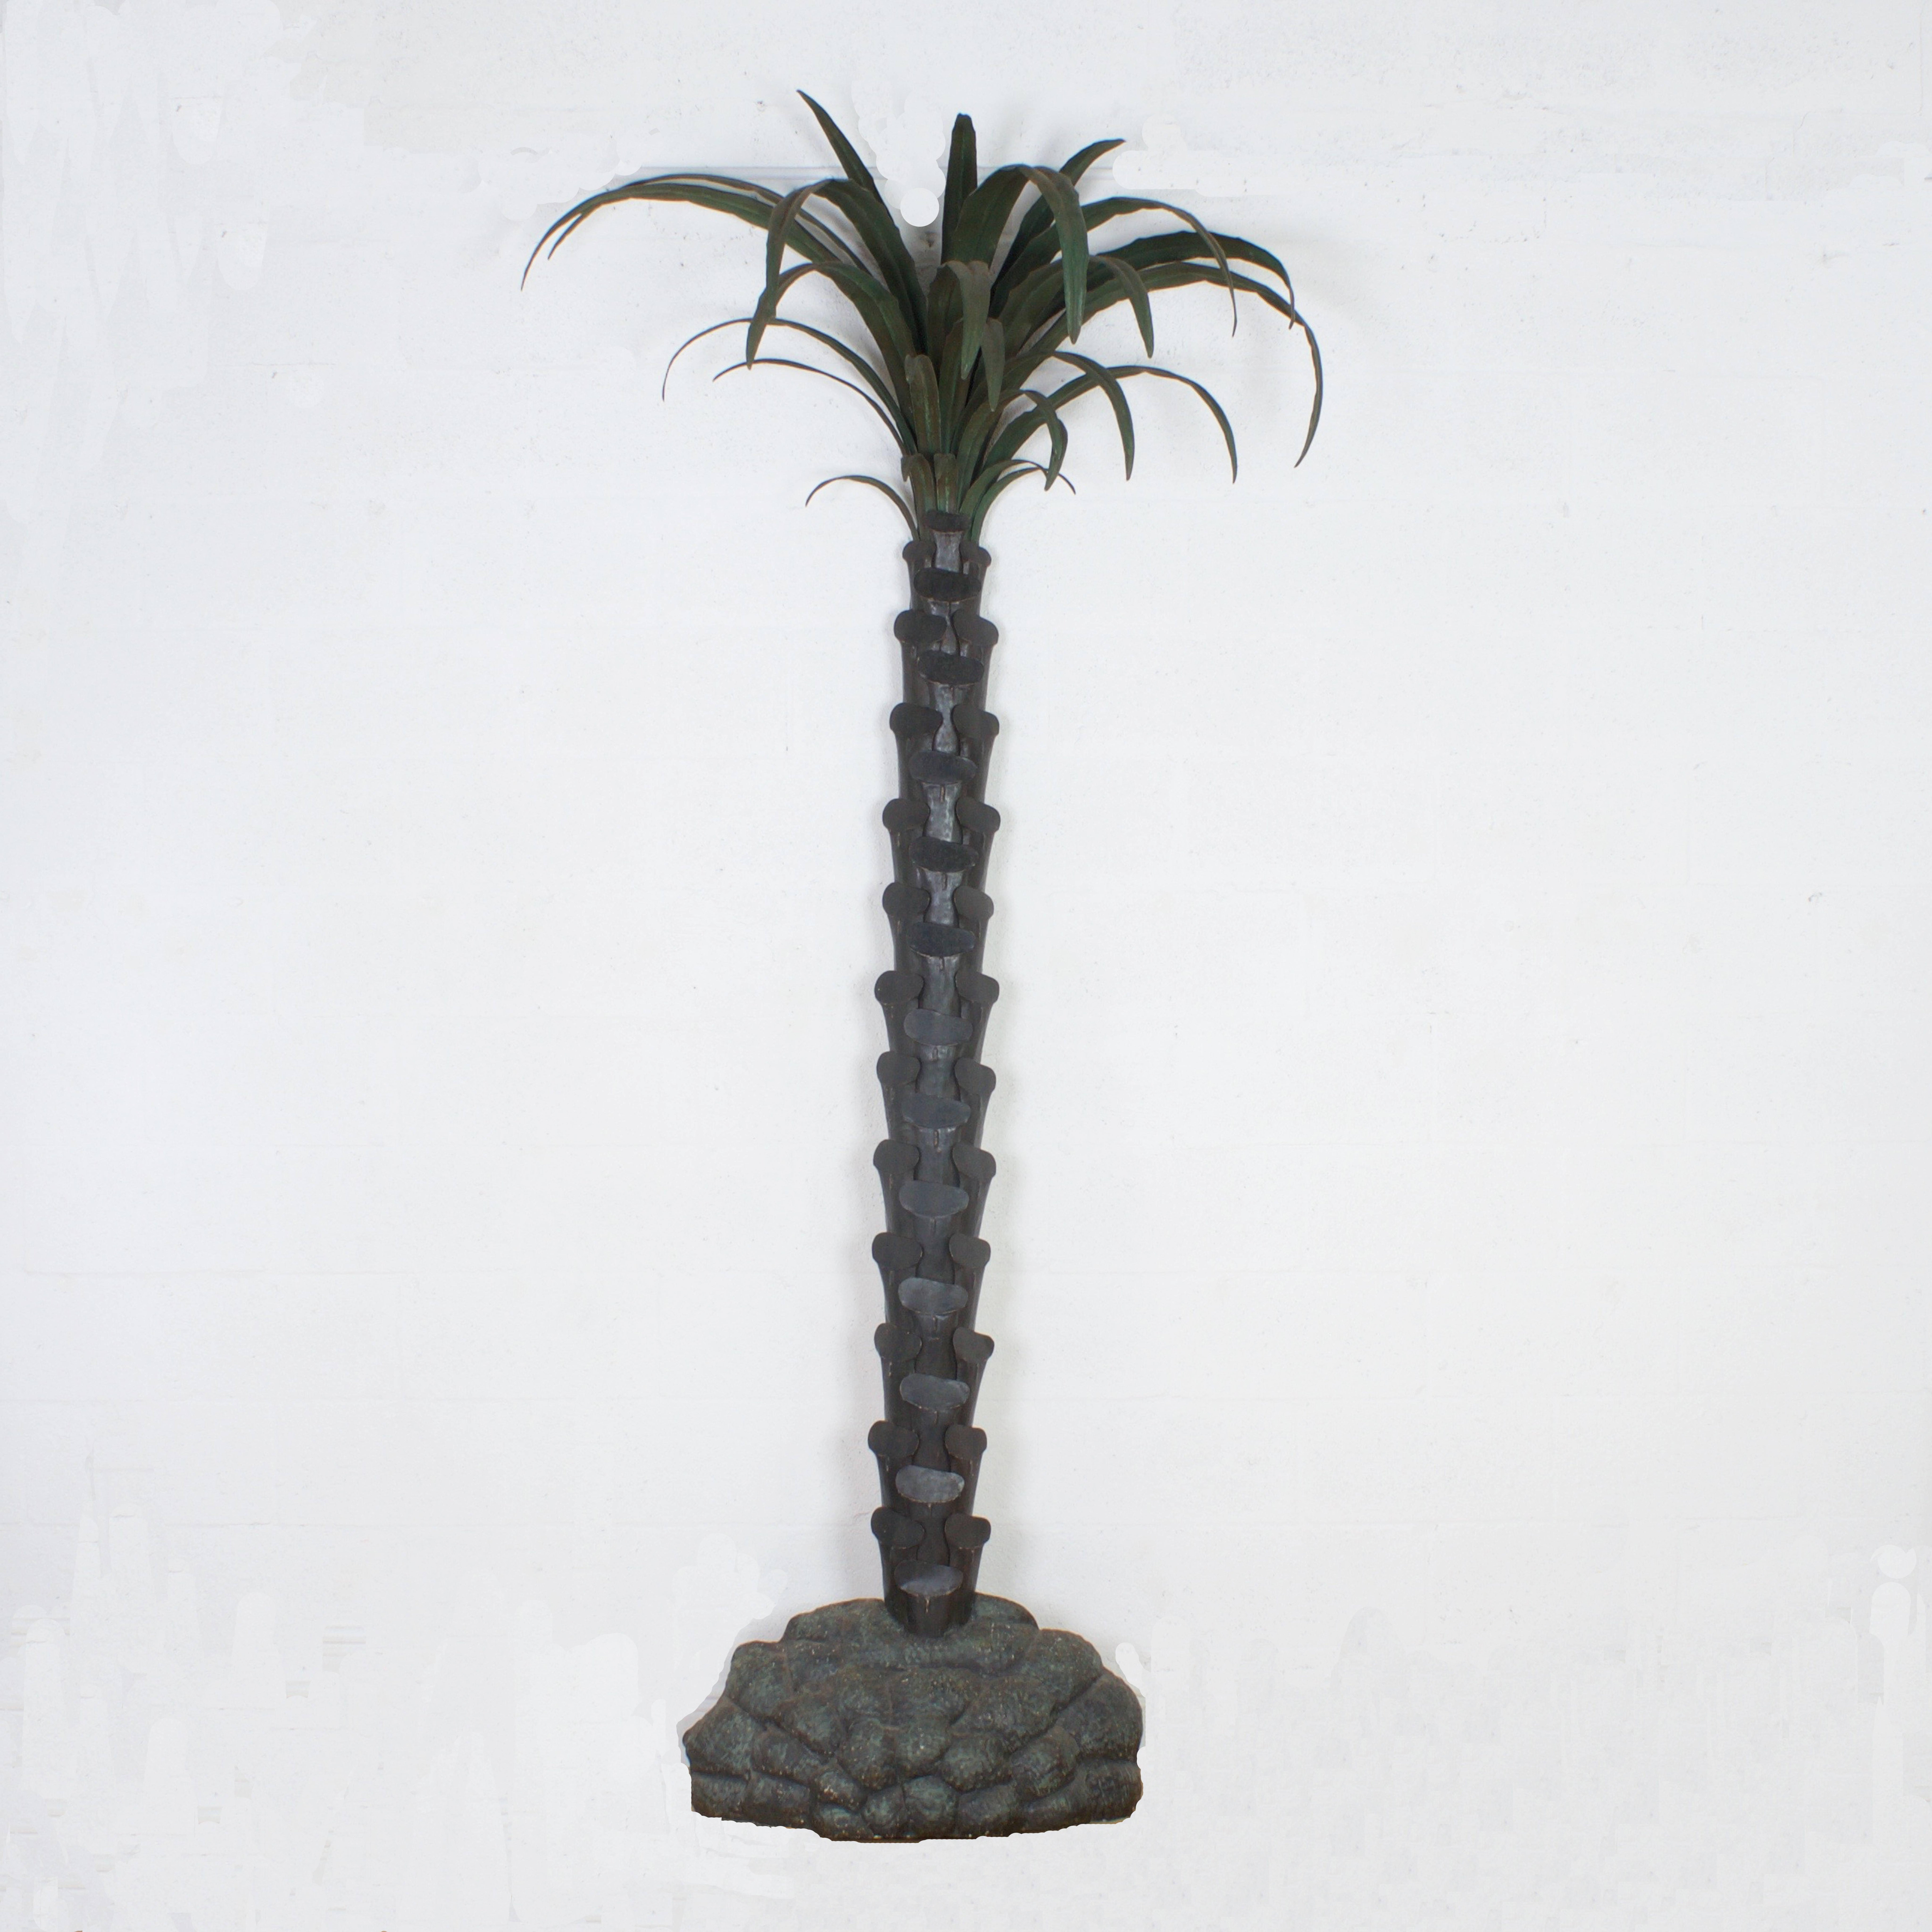 Large and dramatic pair of wall mount stylized palm trees, with a weathered rustic original finish. These palms have striking decorative punch with a touch of whimsey. Crafted to breakdown into 3 pieces for easy shipping. 

.